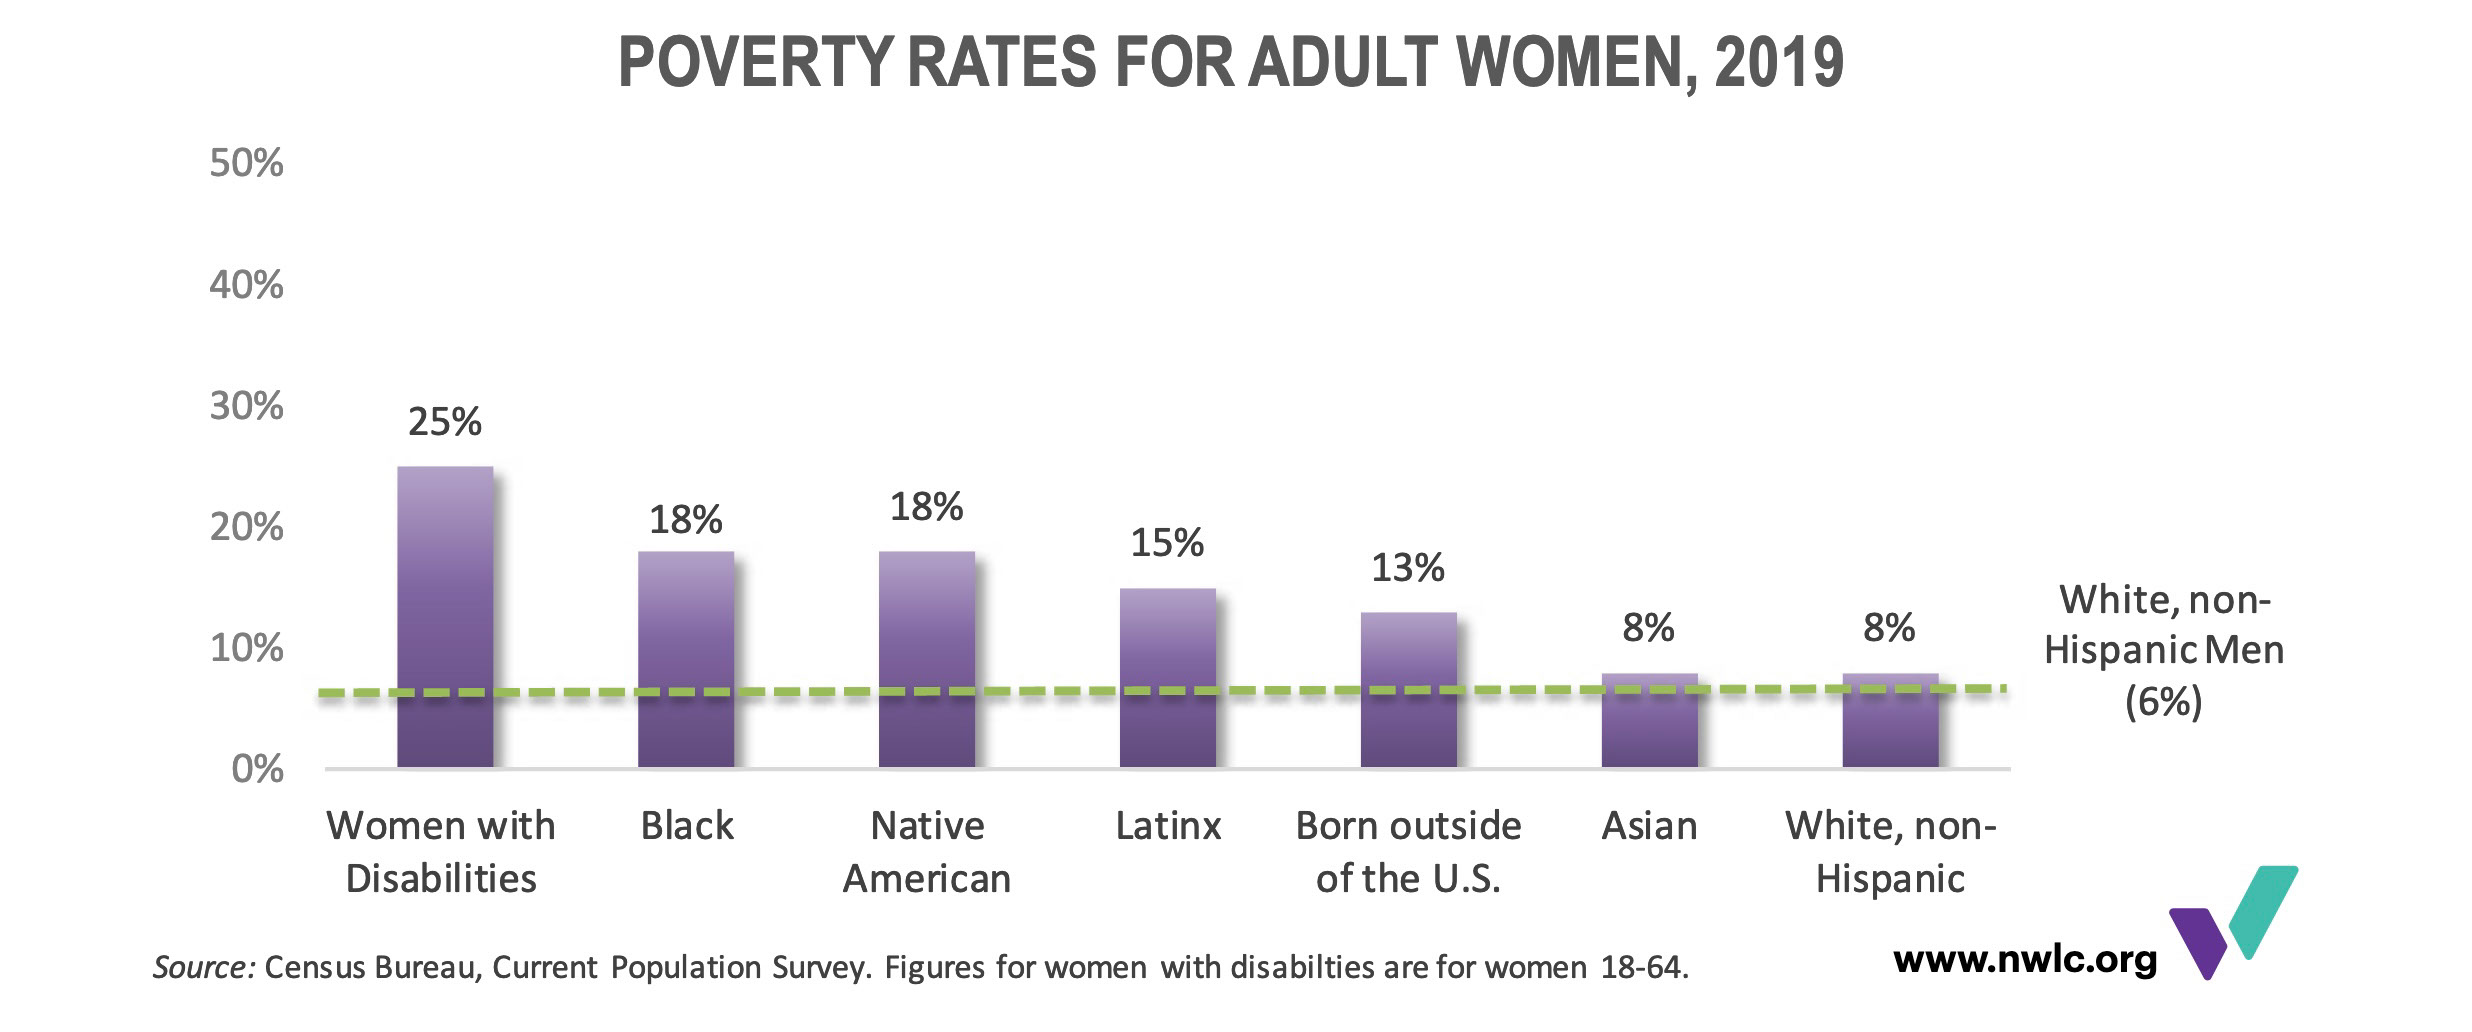 Poverty Rates for Adult Women in 2019, according to the National Women's Law Center.